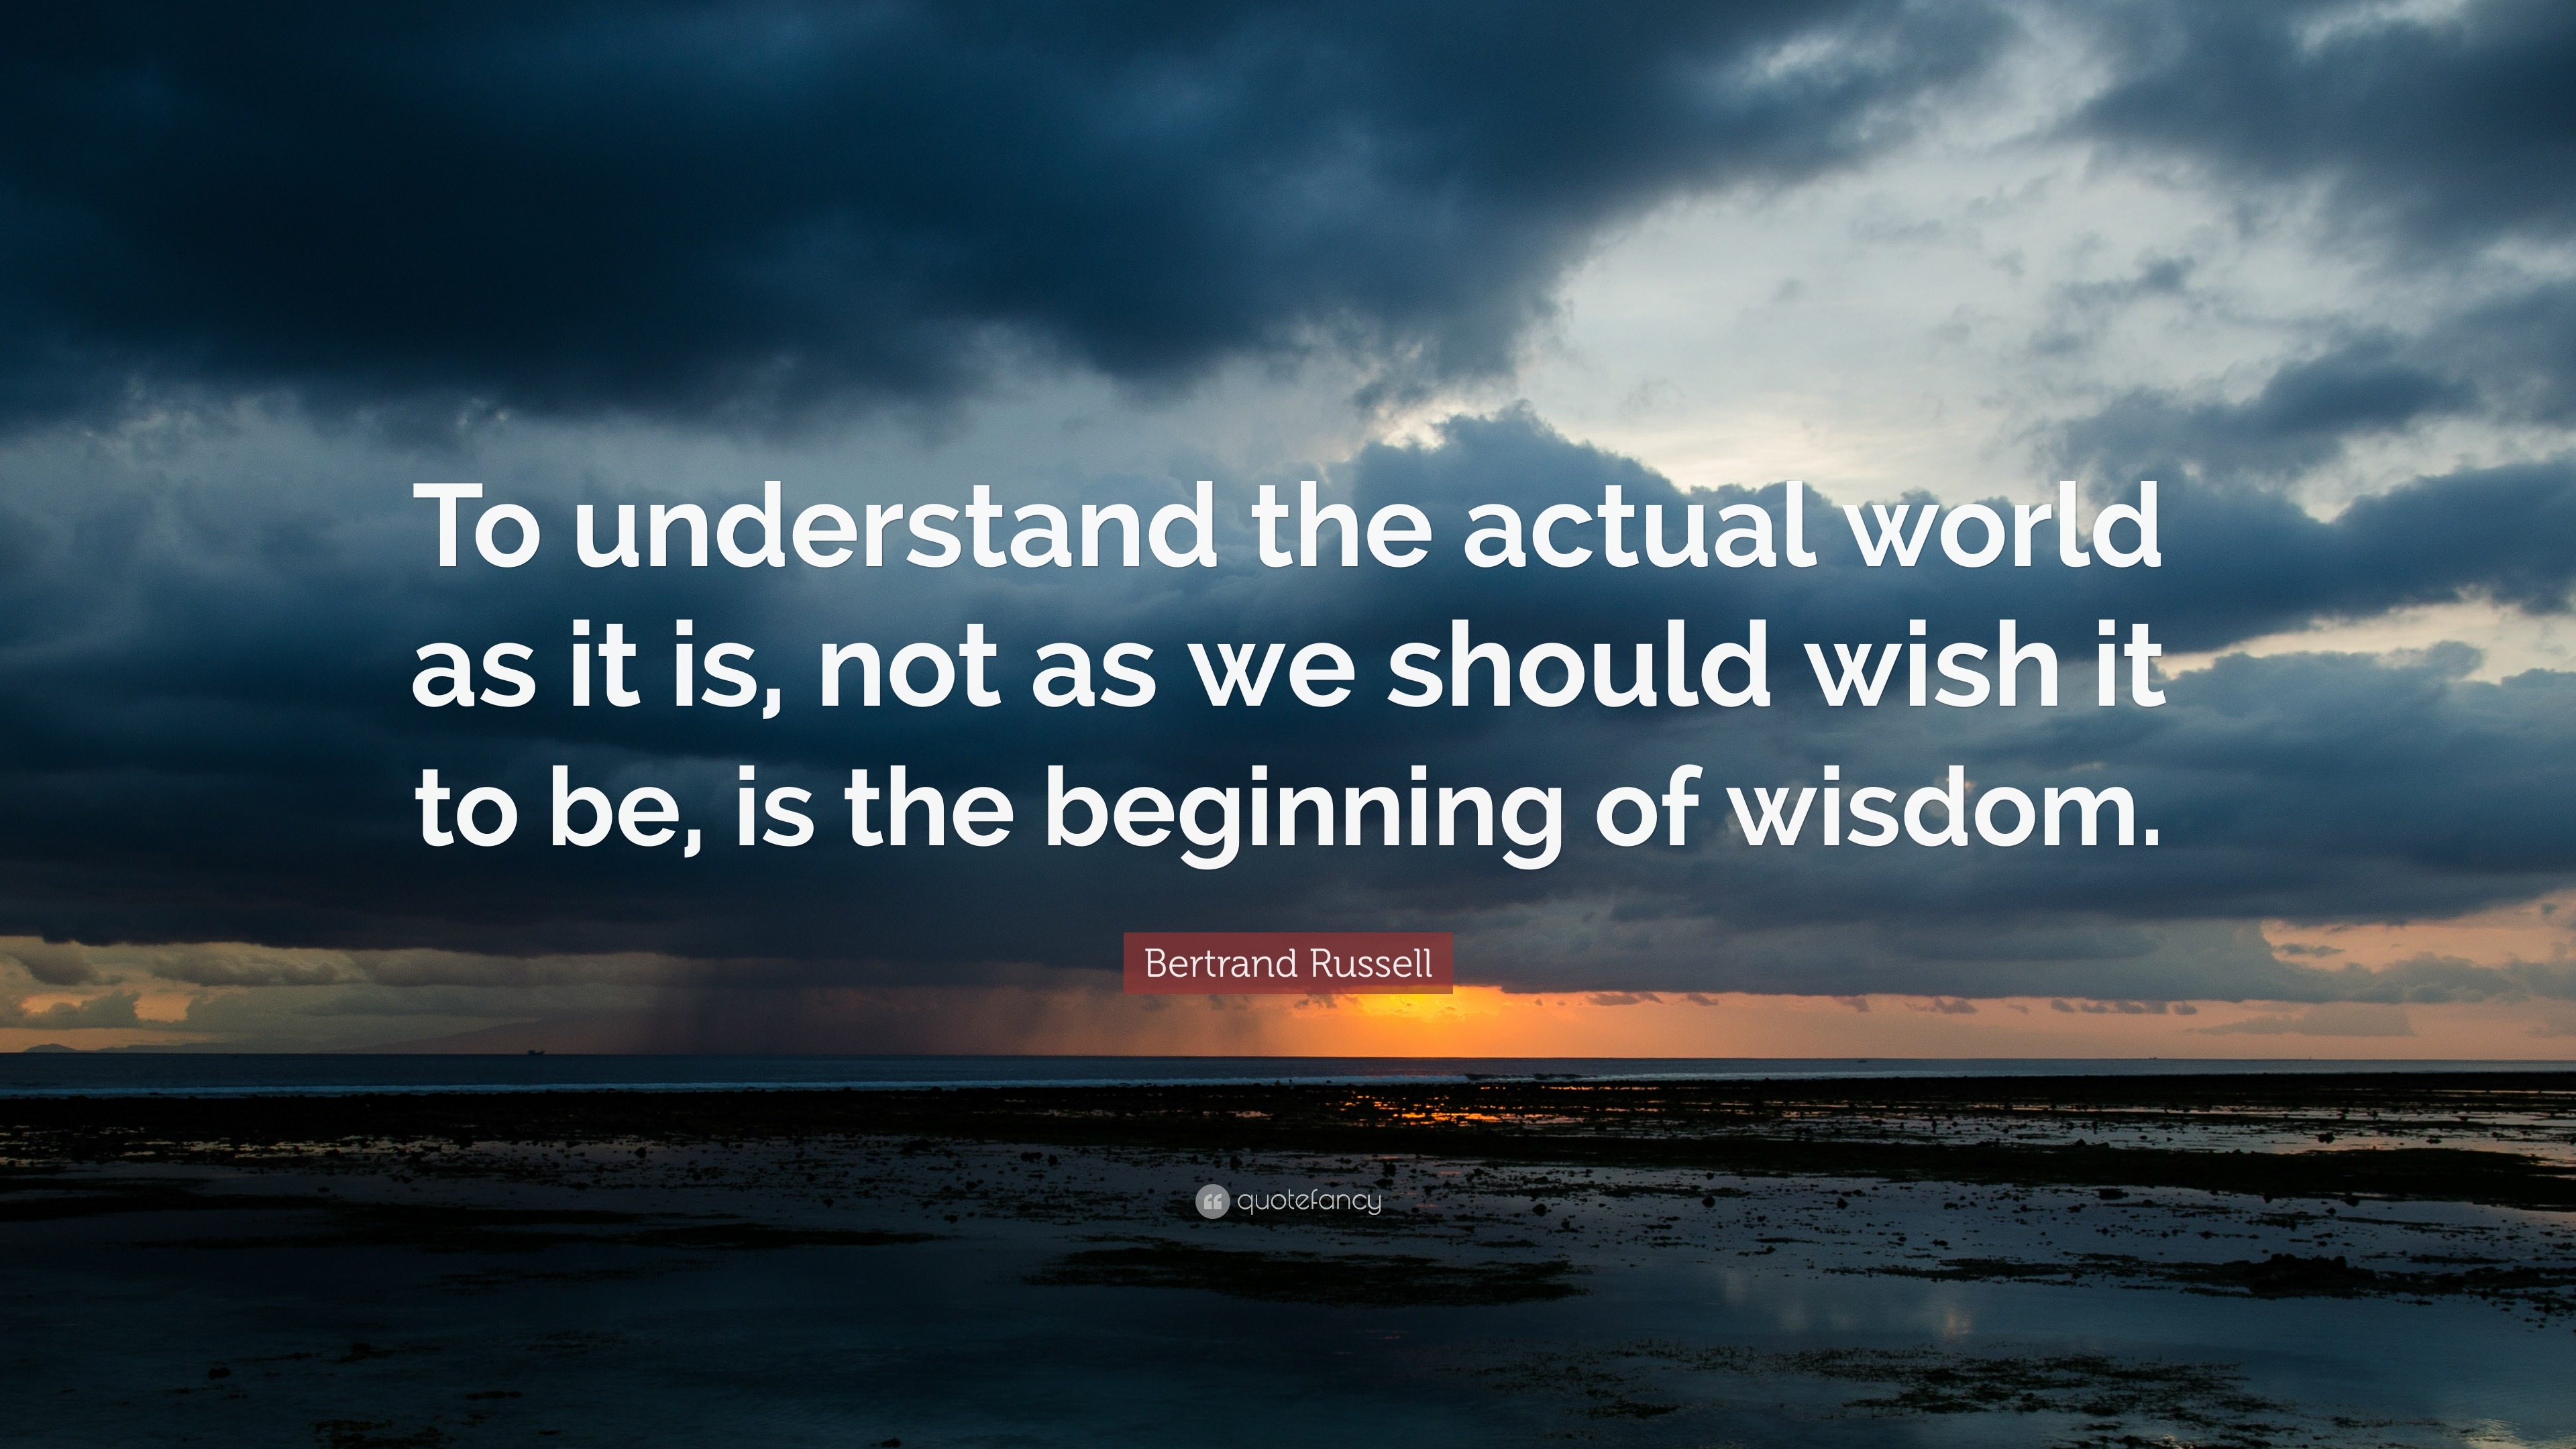 Bertrand Russell Quote: “To understand the actual world as it is, not as we should wish it to be, is the beginning of wisdom.” (12 wallpapers) - Quotefancy